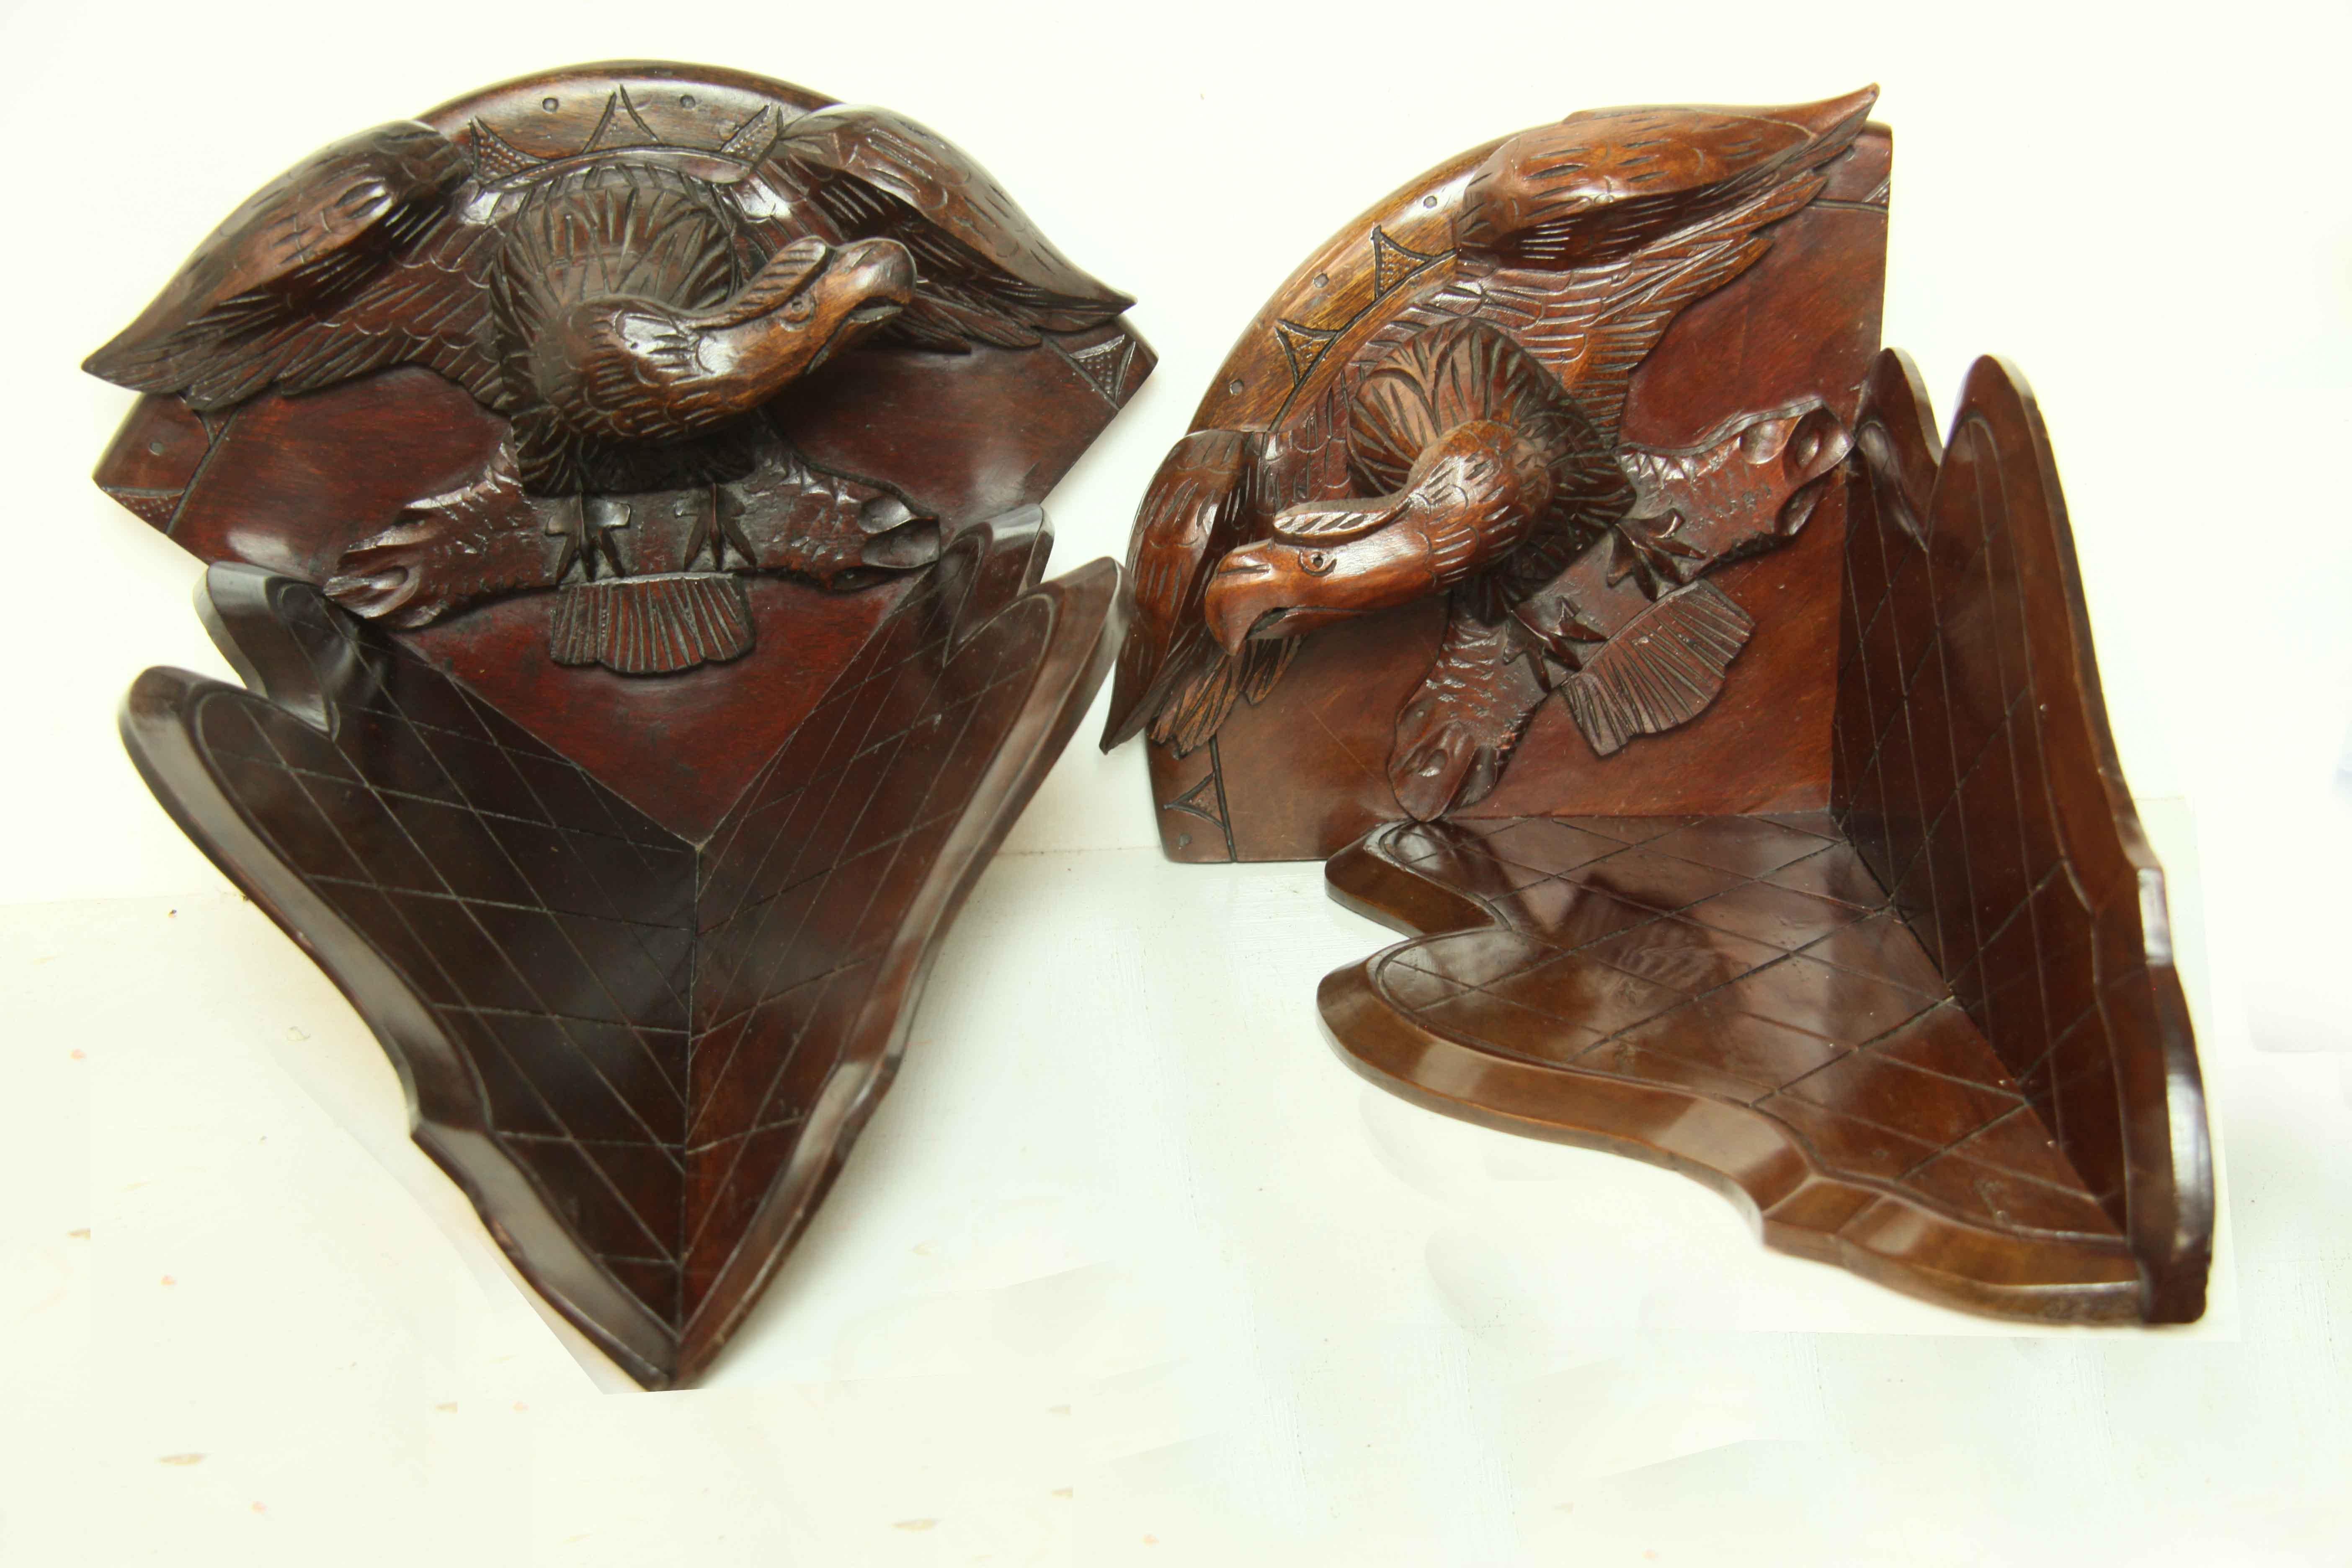 Pair of carved eagle corner brackets, the eagles are pointed towards each other with their wings spread, resting on a branch (the top is a convex shape with the eagles attached), the lower portion is serpentine and heart shaped on each side with